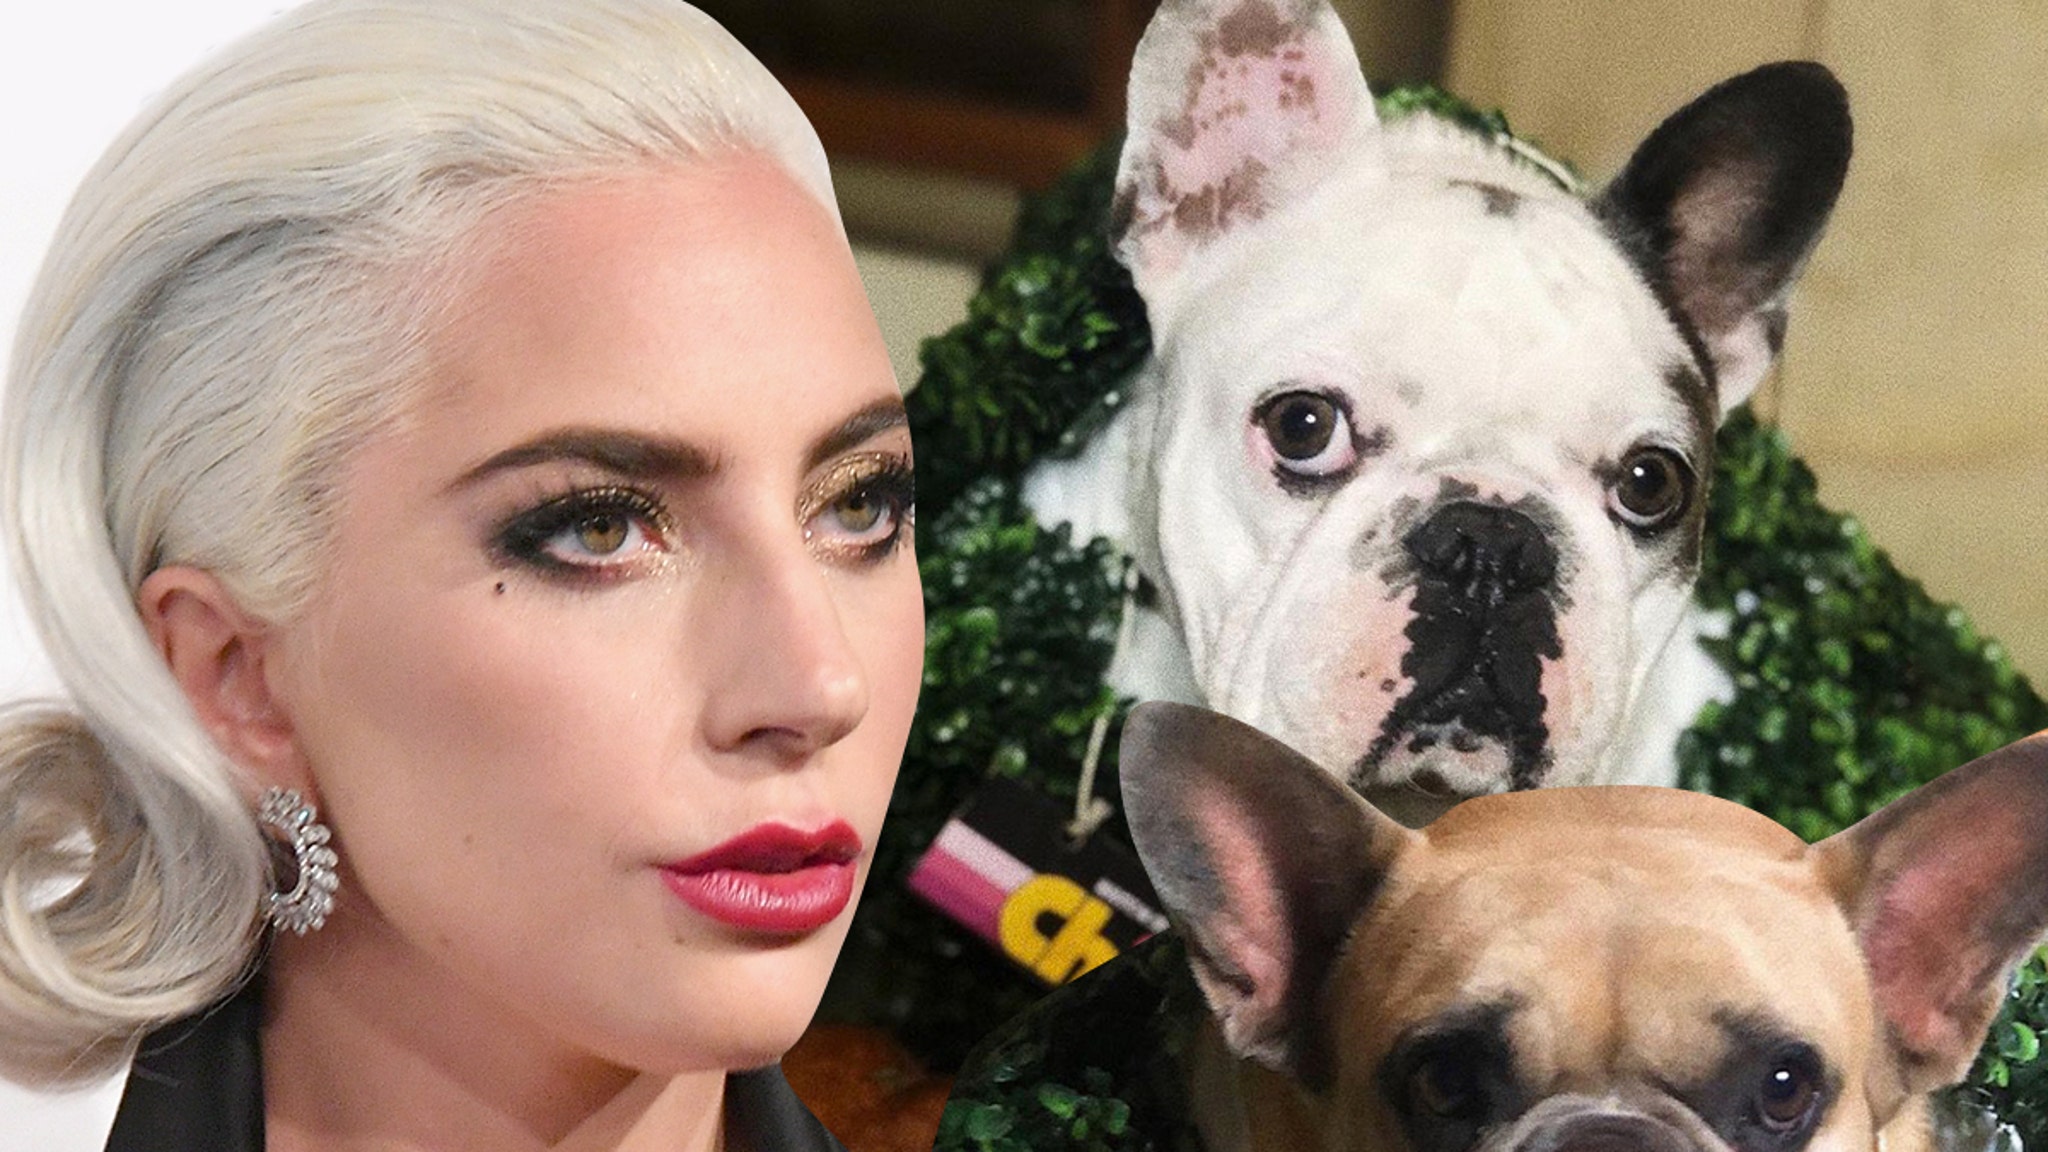 Lady Gaga Dognappers may have chosen the singer as ransom goal